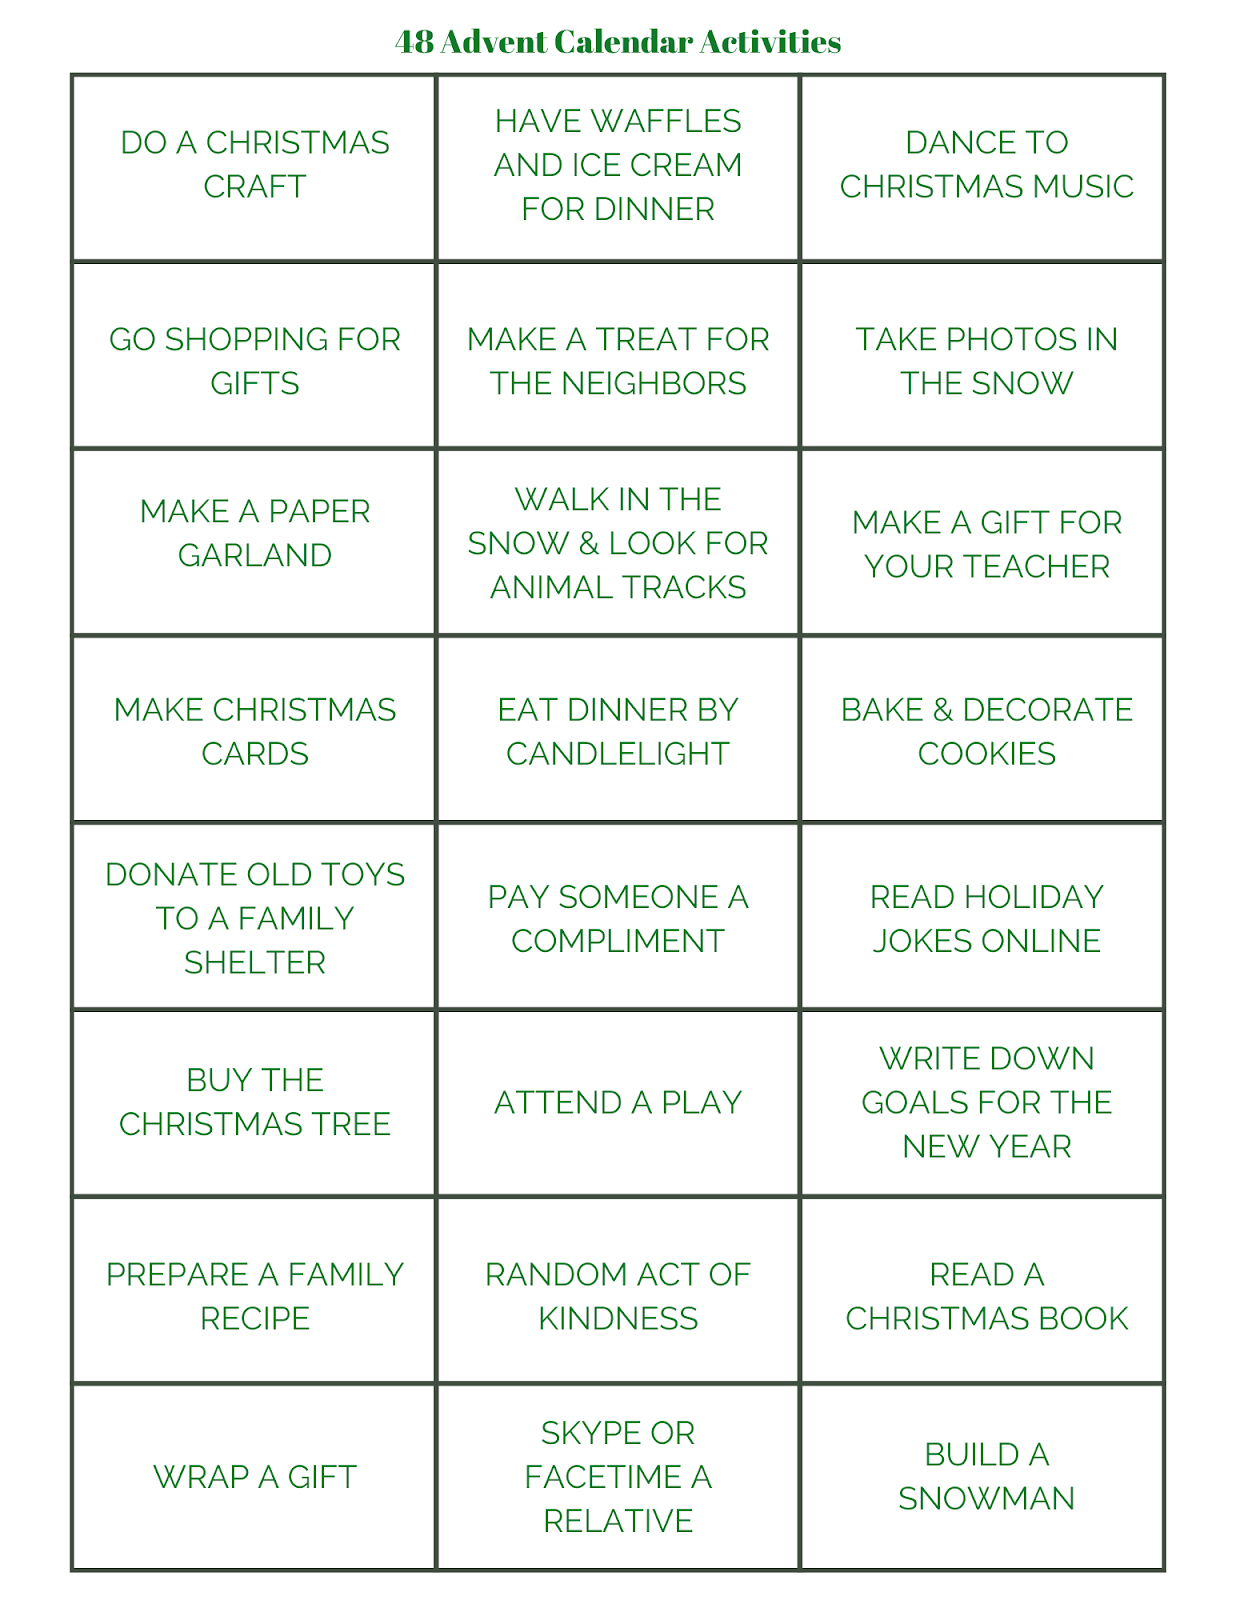 ideas for advent calendar gifts, advent calendar fillers, advent activity ideas, advent activities for families